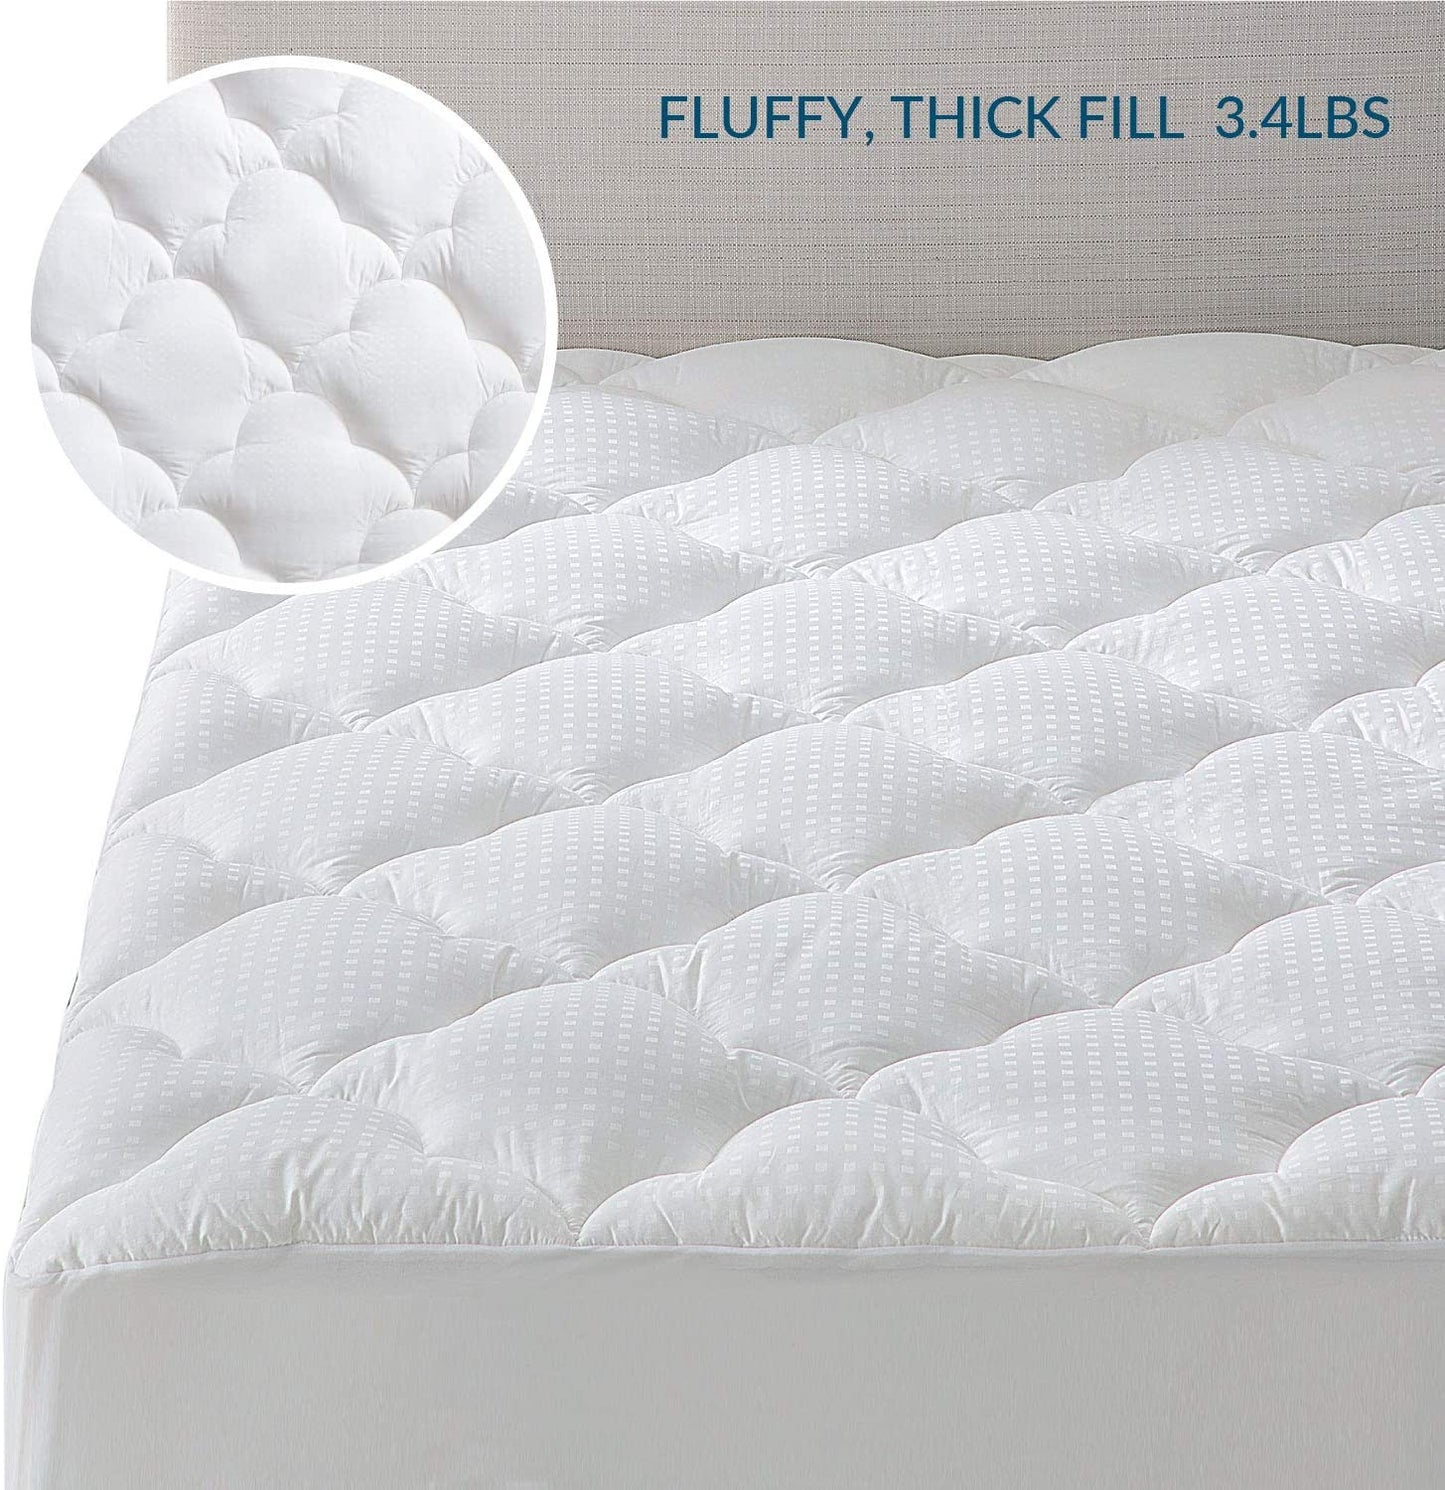 Bedsure Pillow Top Mattress Topper Queen Size - Cooling Mattress Pad Cotton Quilted Mattress Cover with Deep Pocket，Padded Pillow Top with Fluffy down Alternative Fill